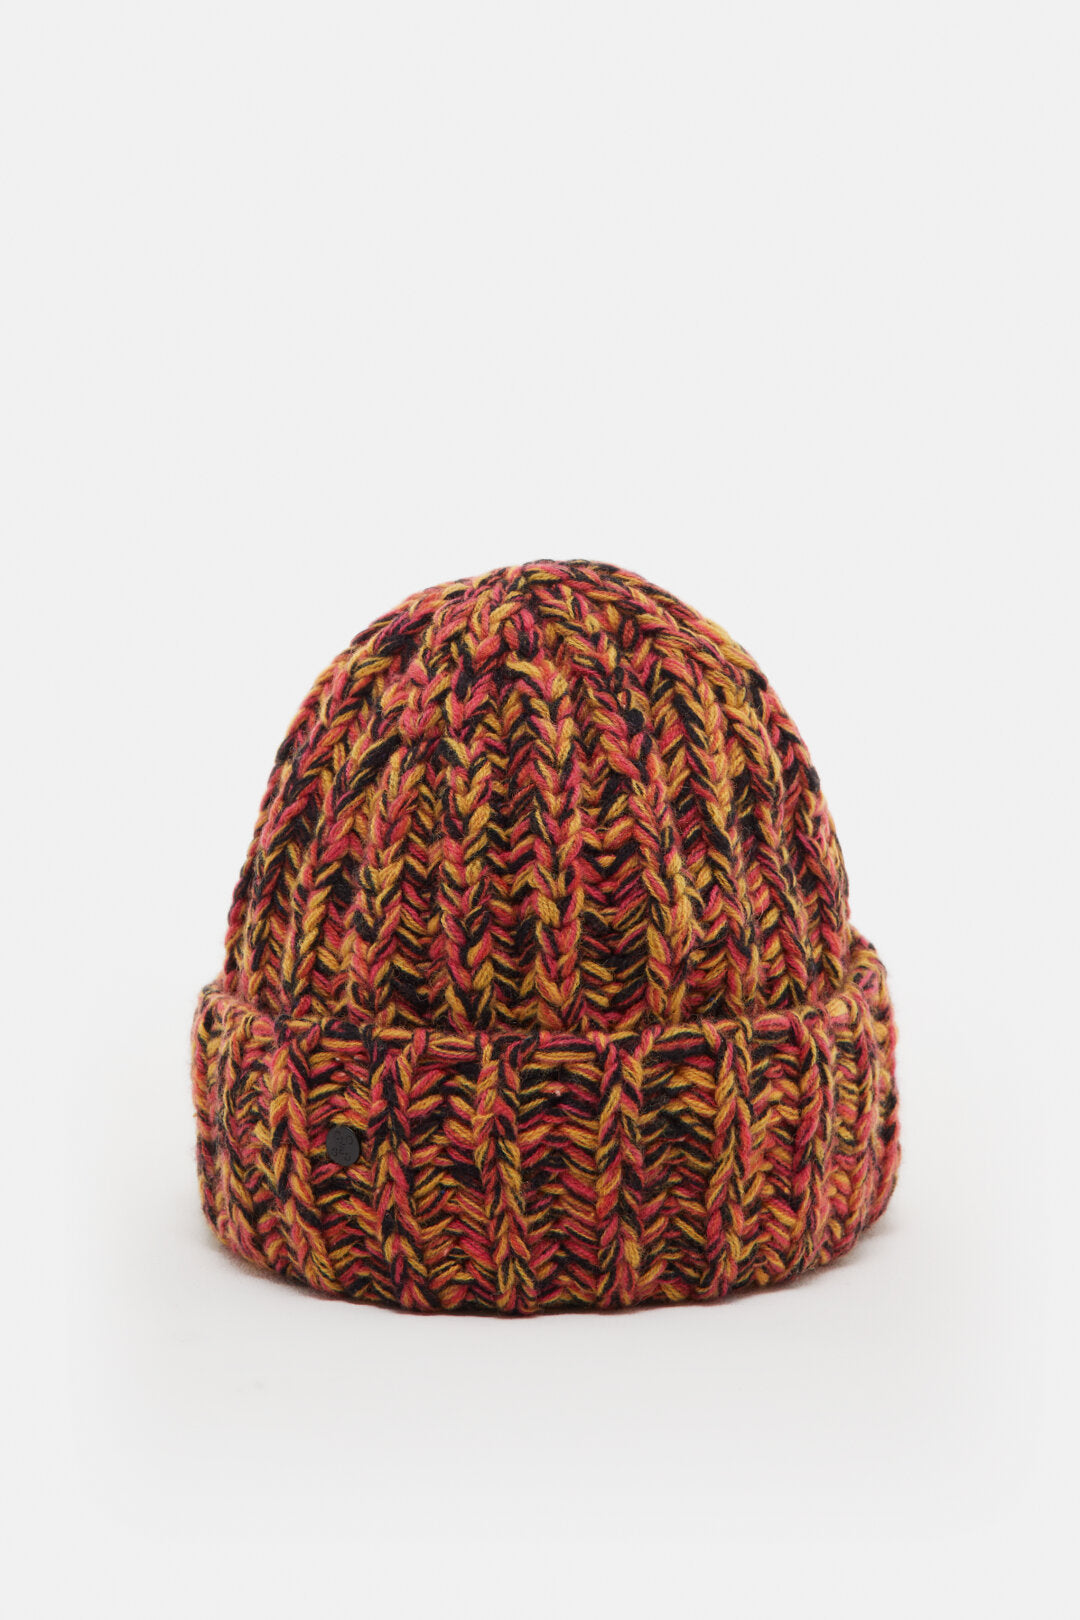 HAND KNIT BEANIE - EMBER RED